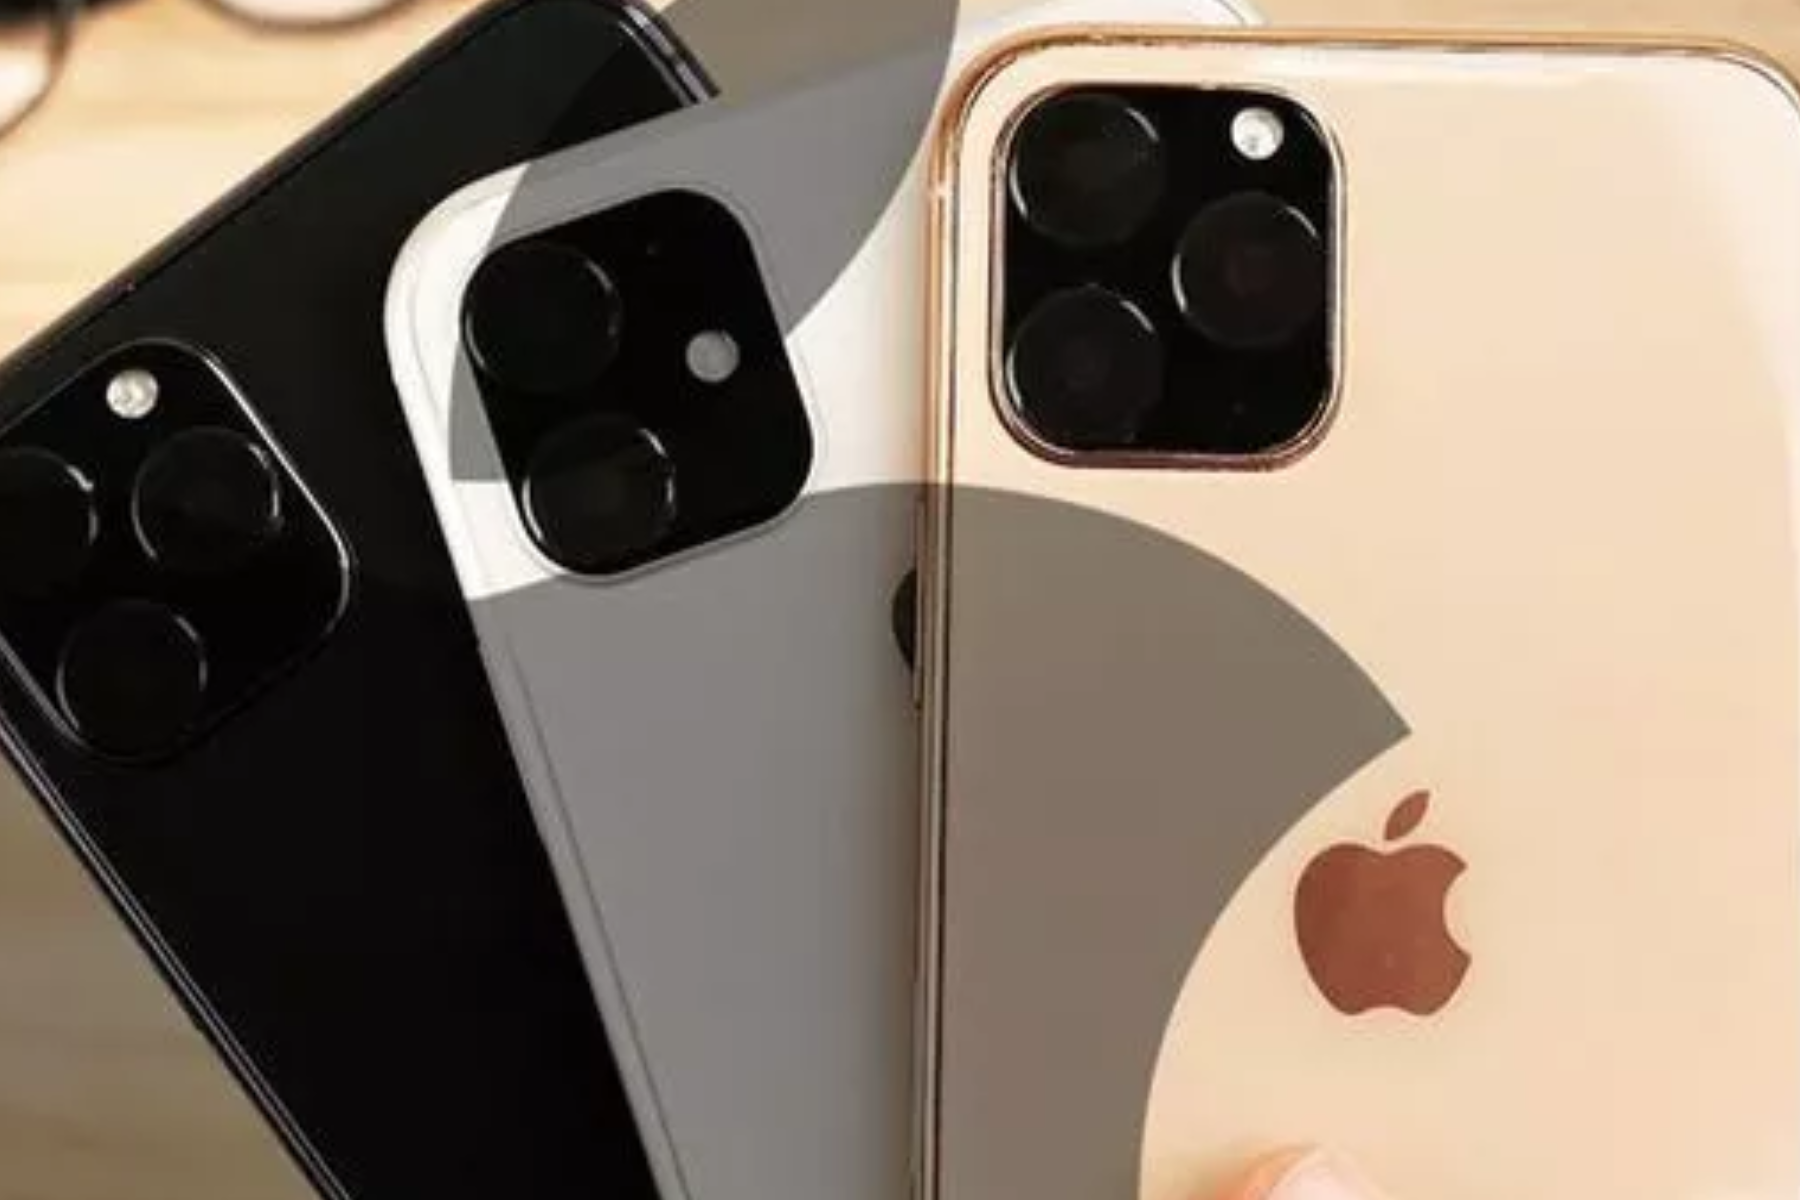 Three distinct colors for the iPhone 11